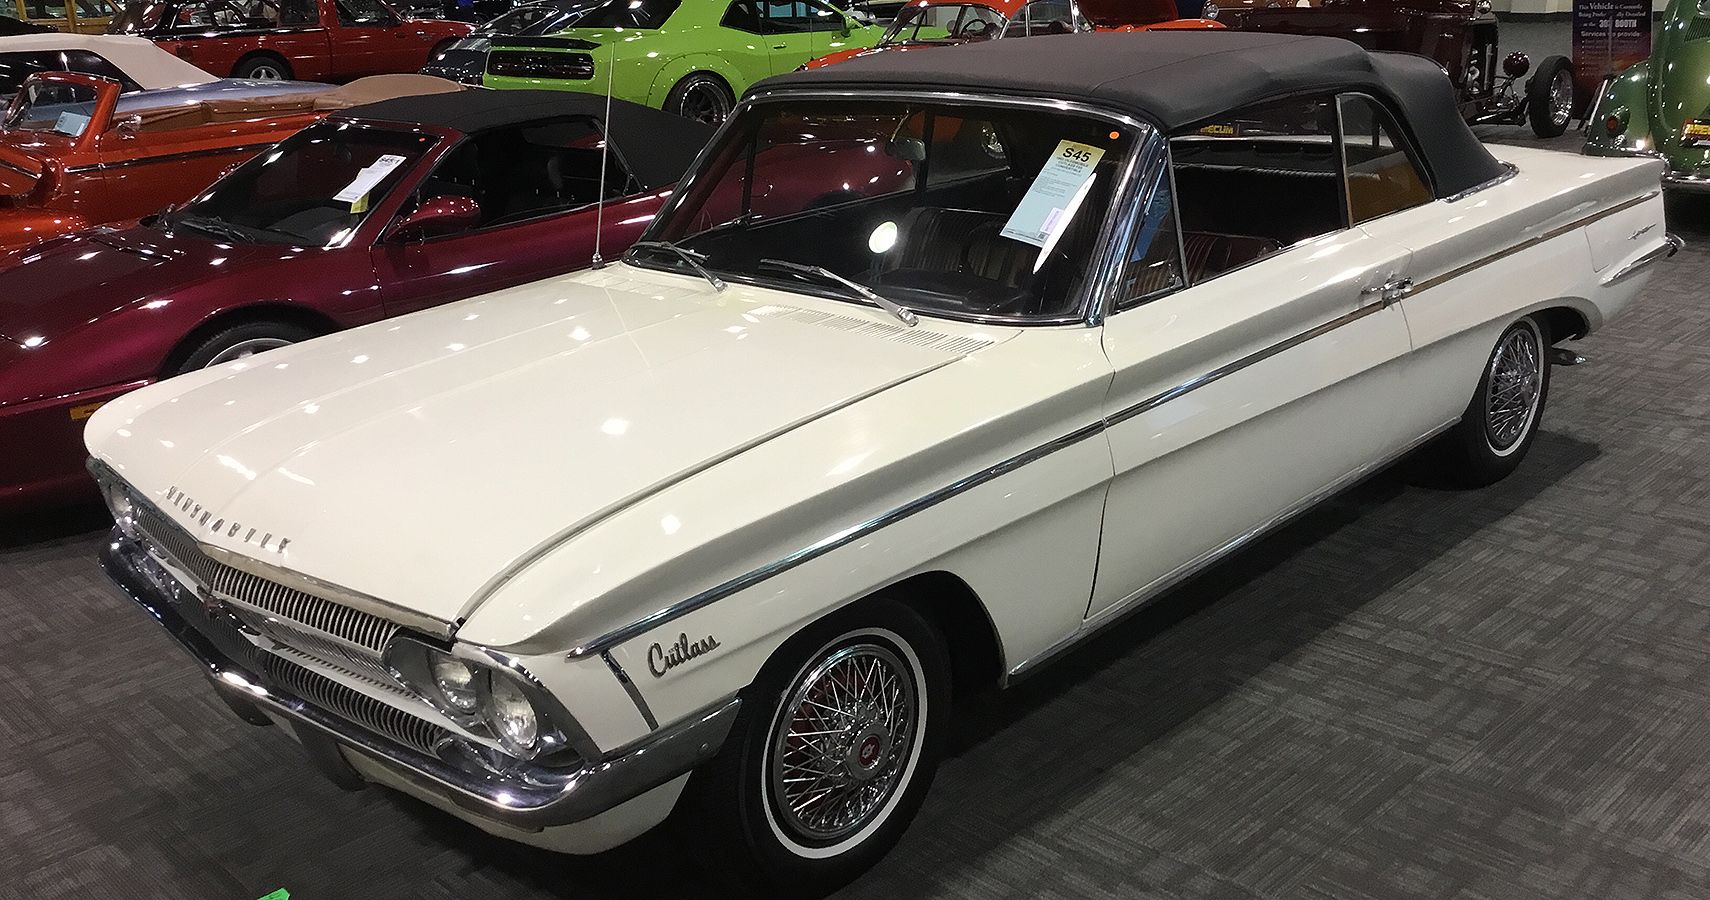 The Good Olds: 1962 Oldsmobile F85 Cutlass, A Classic Series